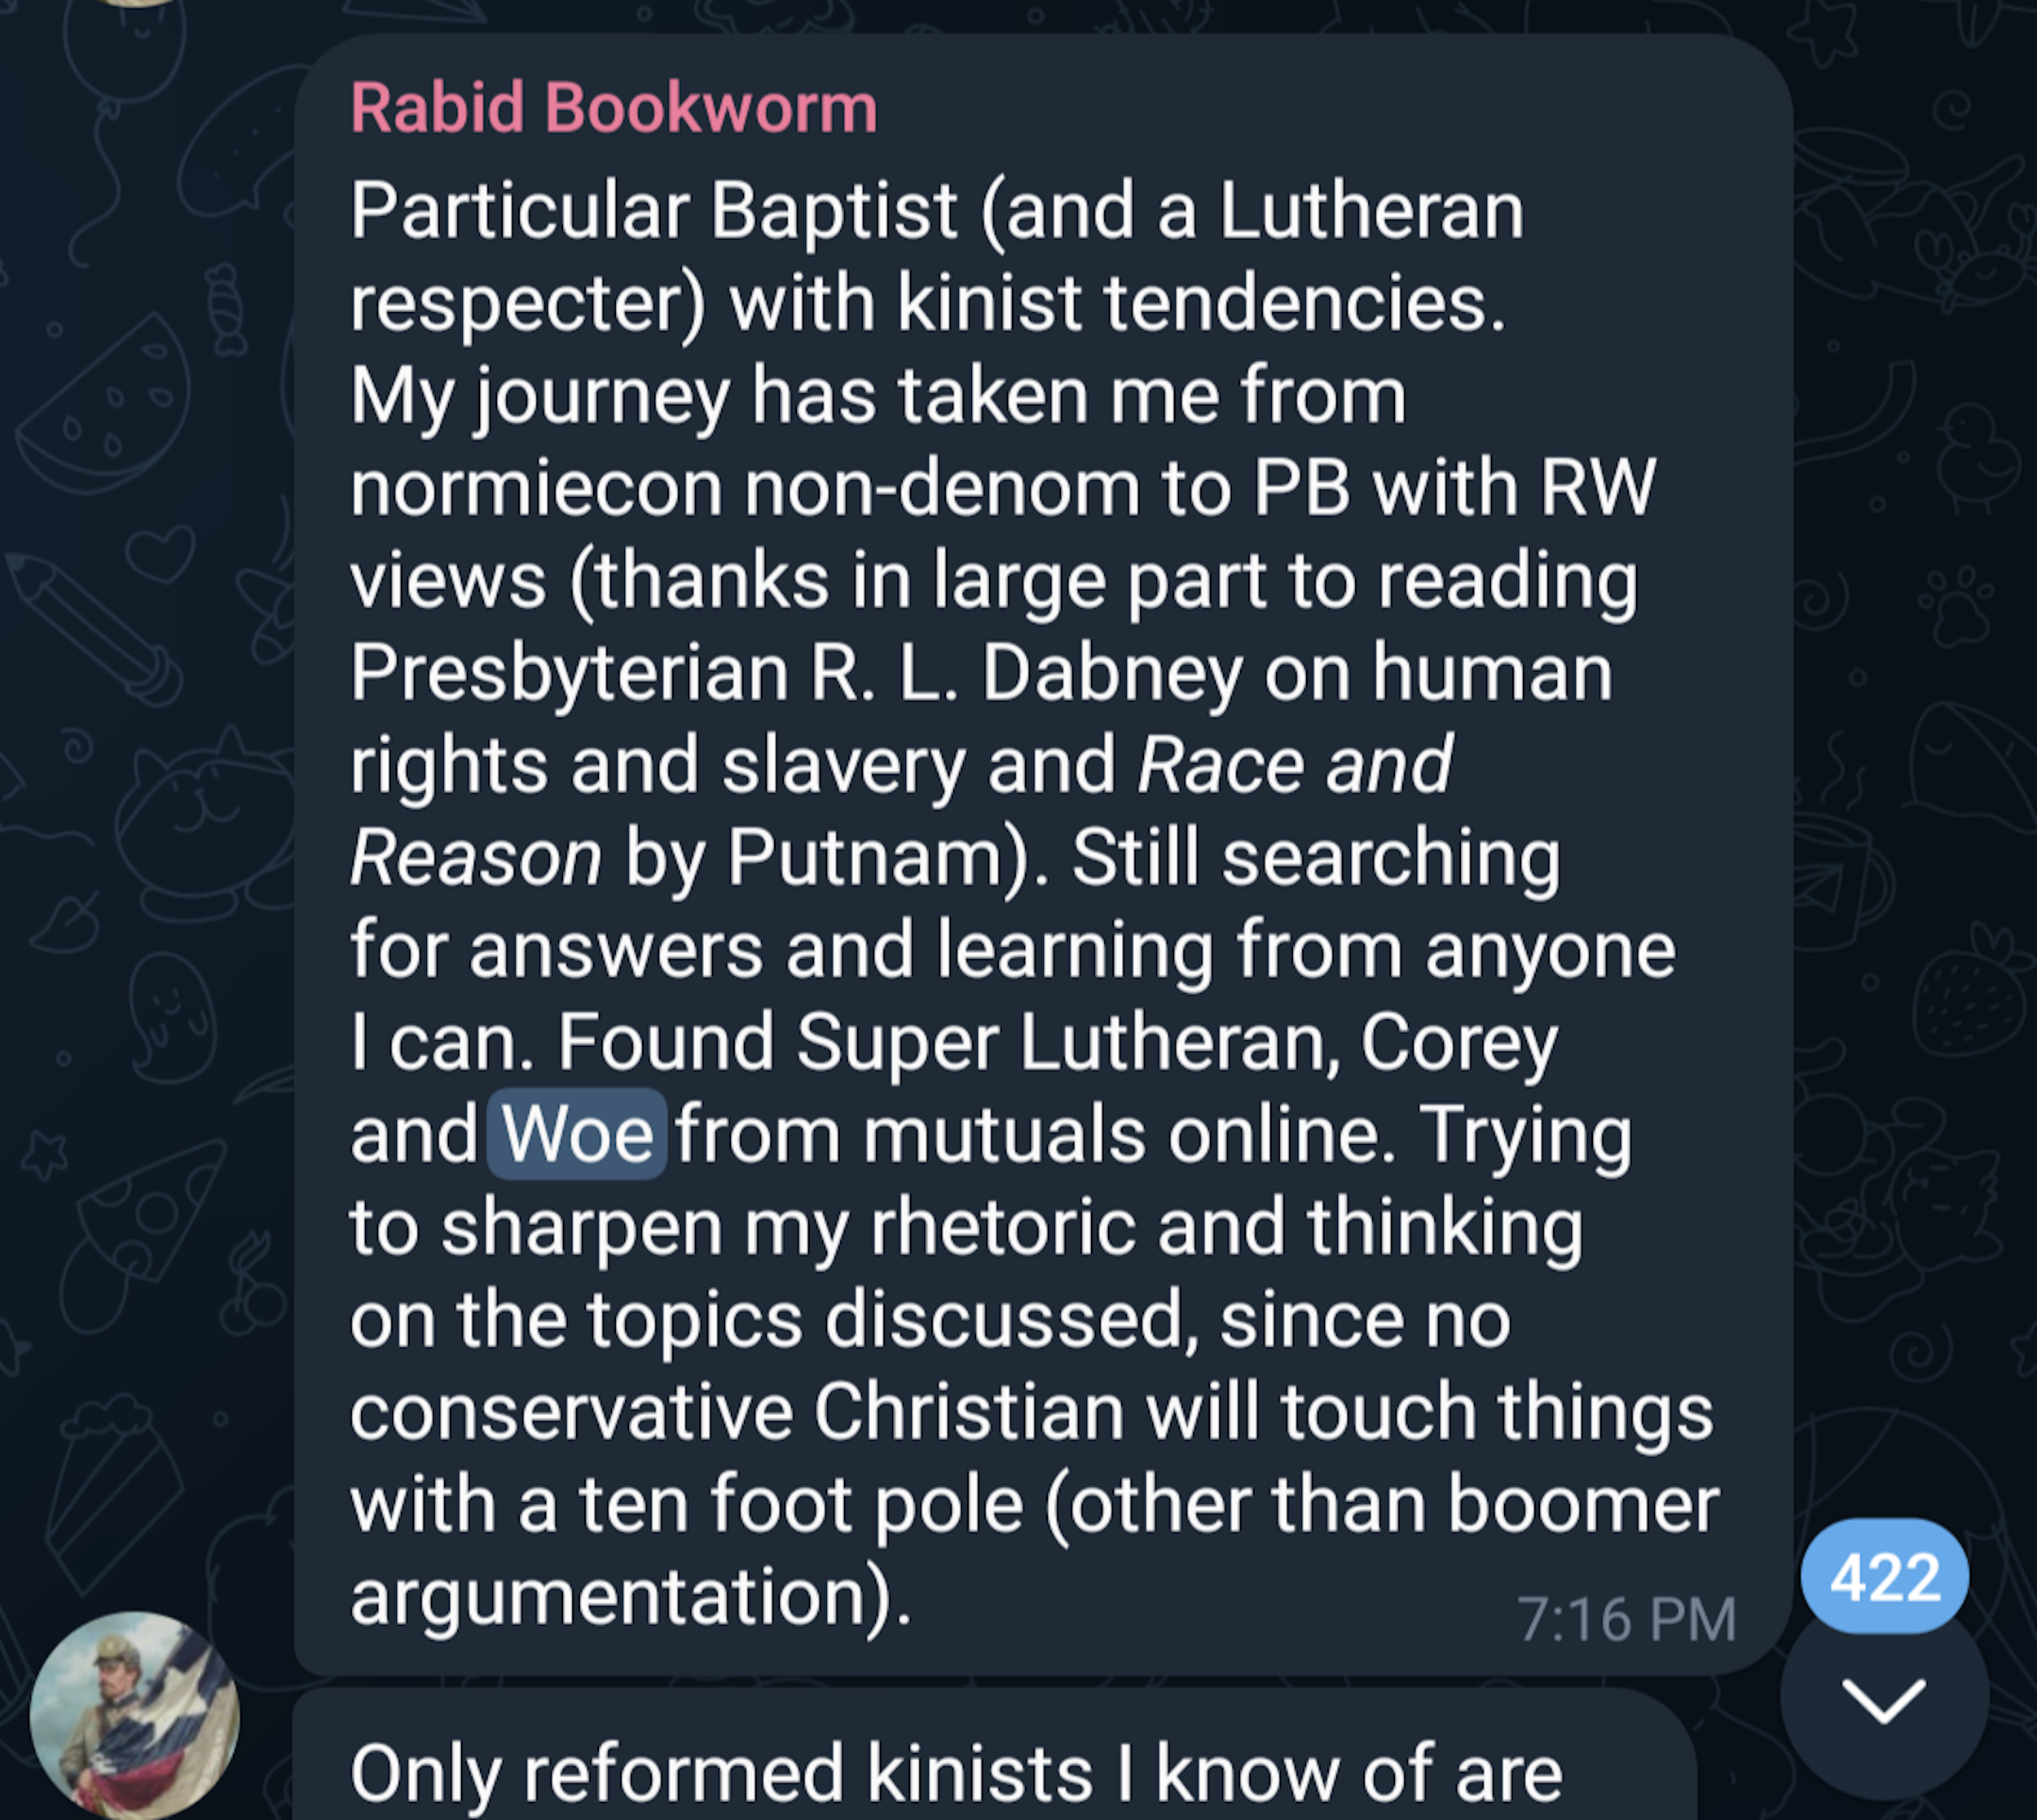 "Rabid Bookworm" on Telegram identifies as a "Particular Baptist (and a Lutheran respecter) with kinist tendencies," says that he "found Super Lutheran, Corey, and Woe from mutuals" and that he is "trying to sharpen his rhetoric" on the topics under discussion.